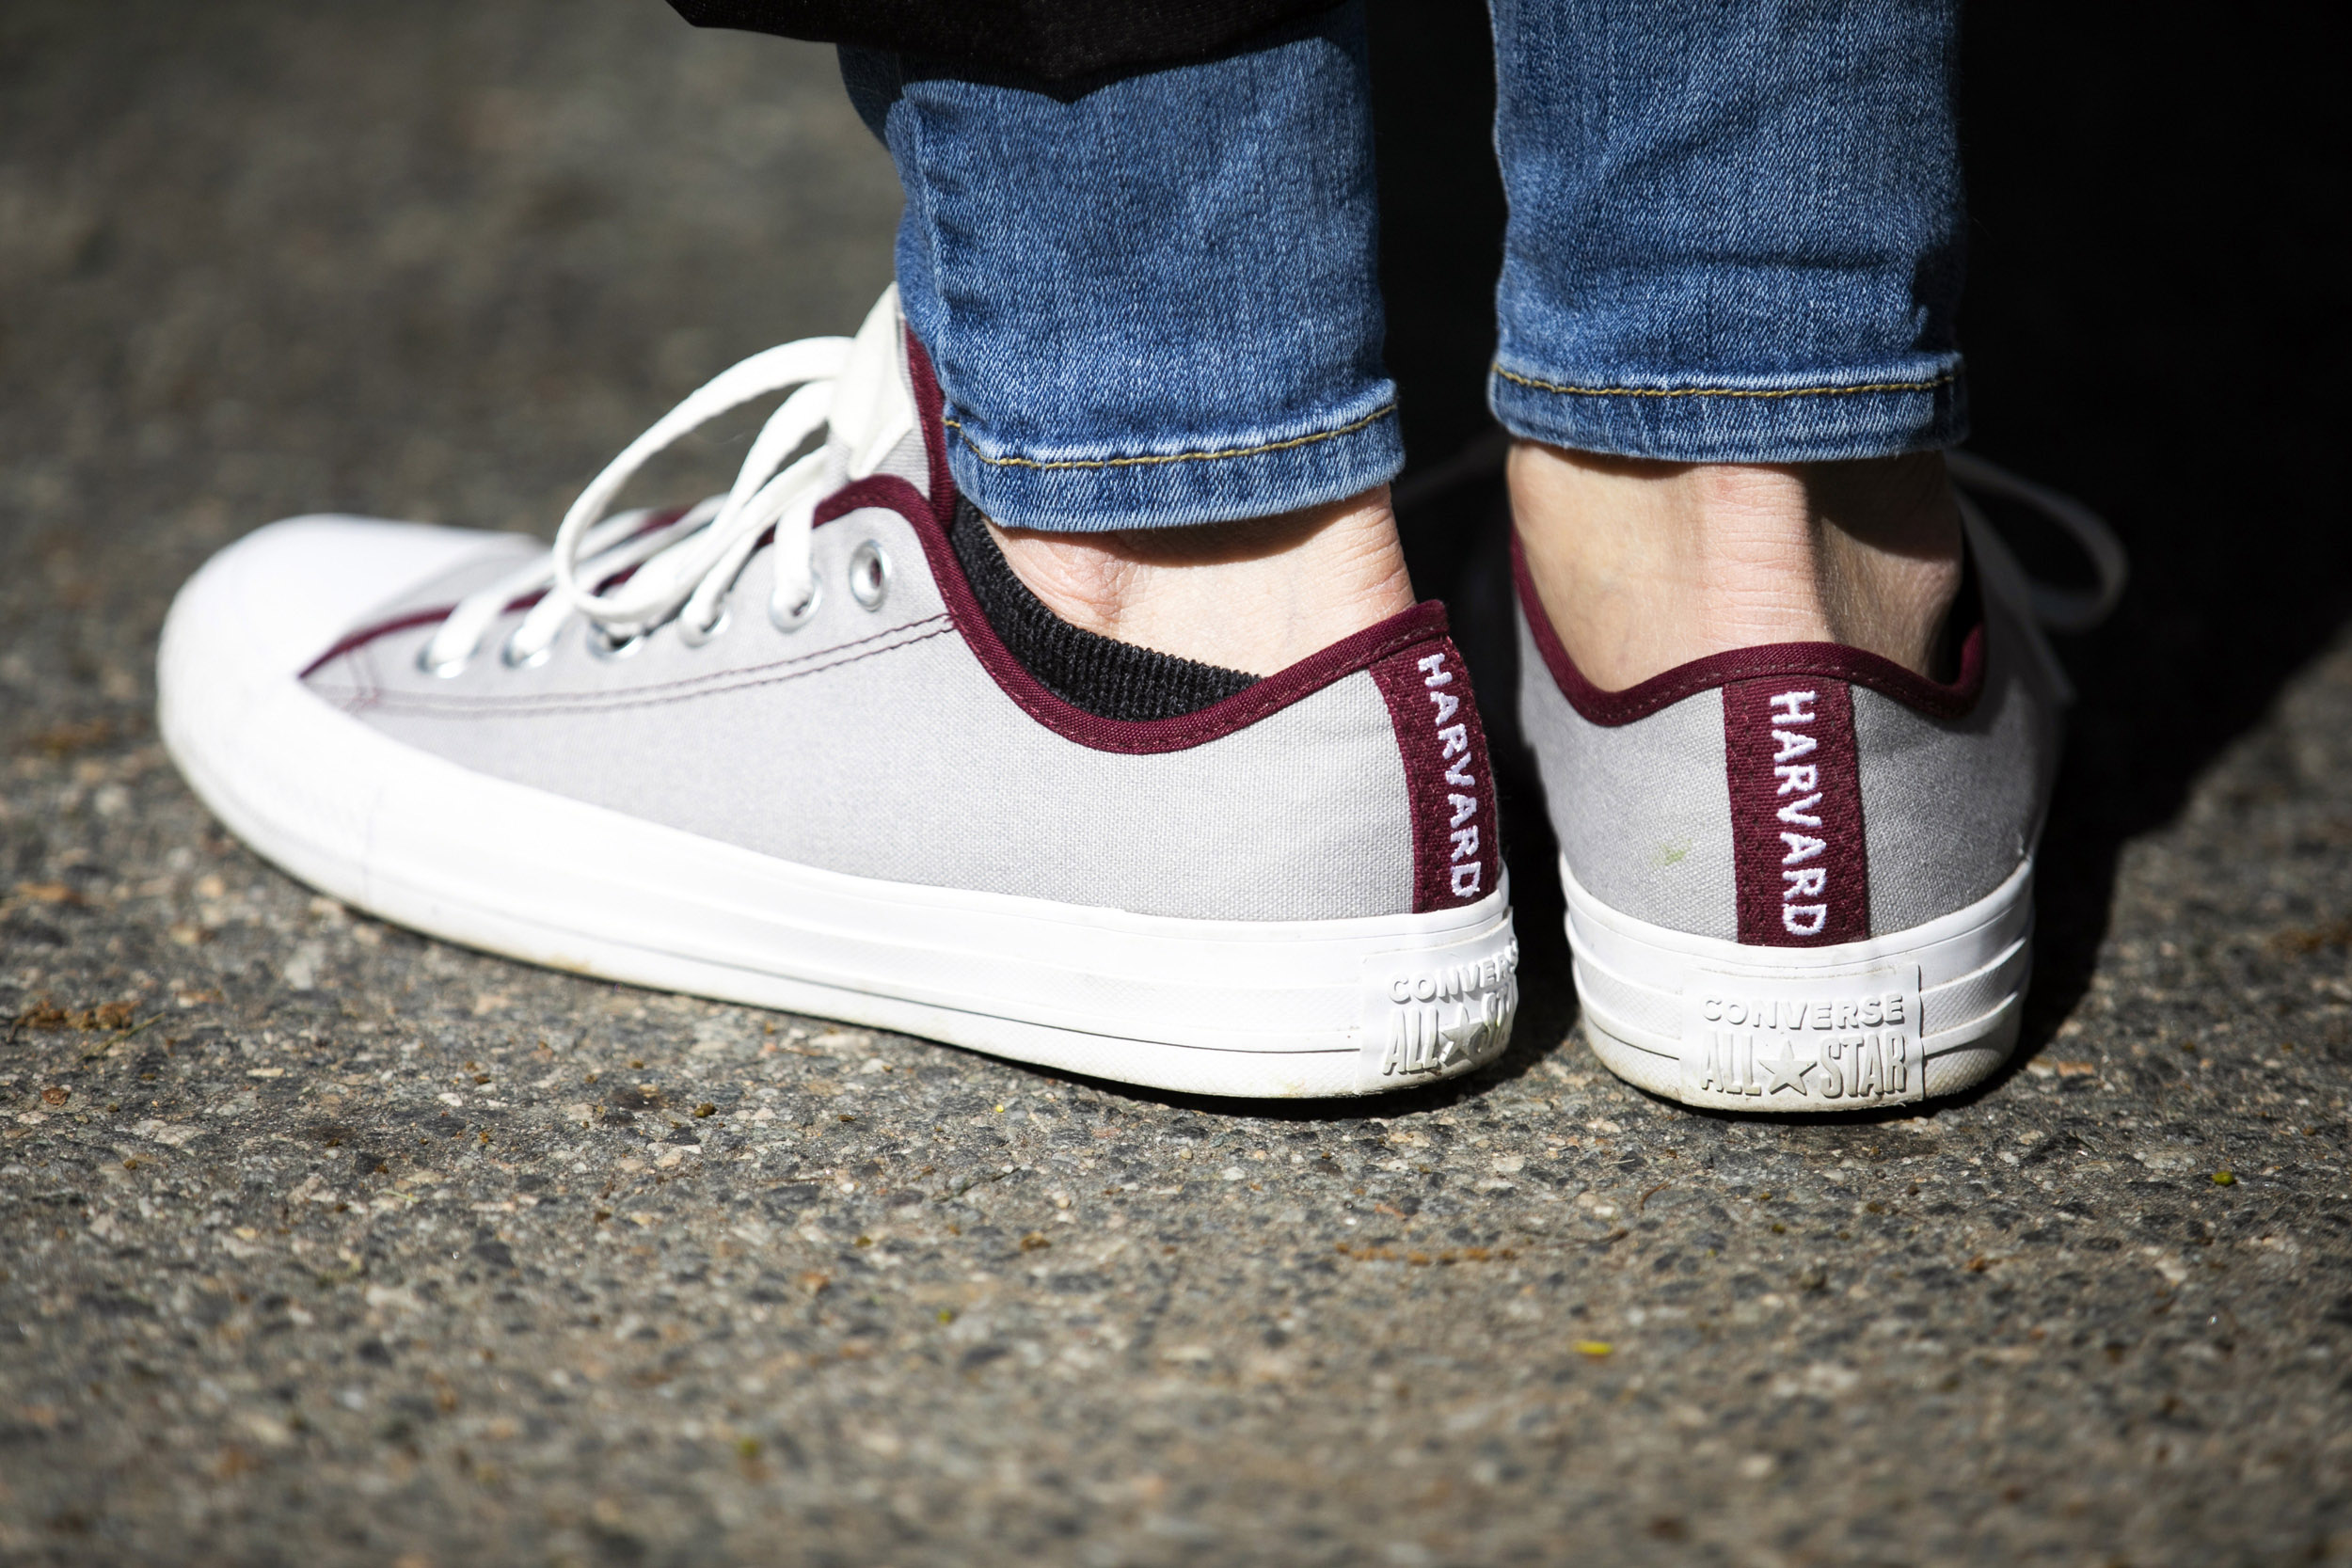 Converse sneakers that read Harvard along the back.